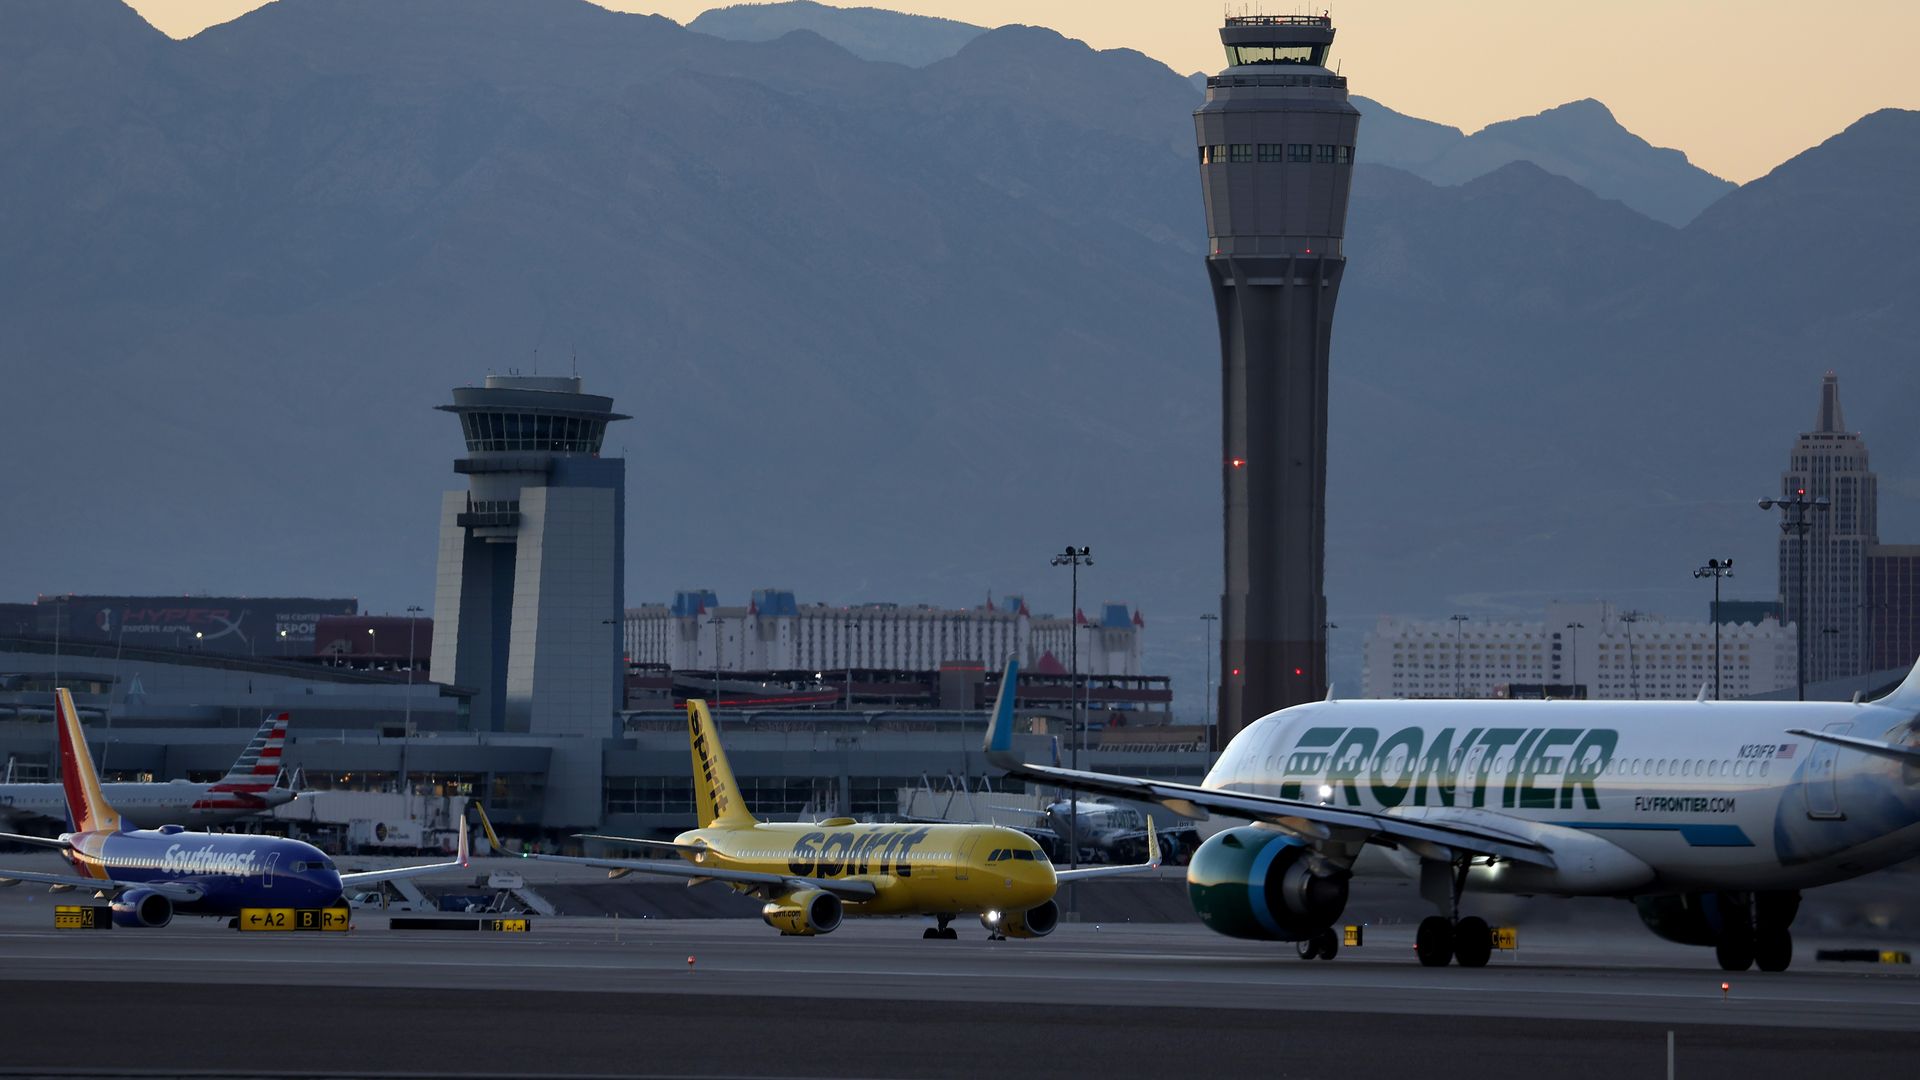 Airplanes at airport including a Frontier Airlines plane